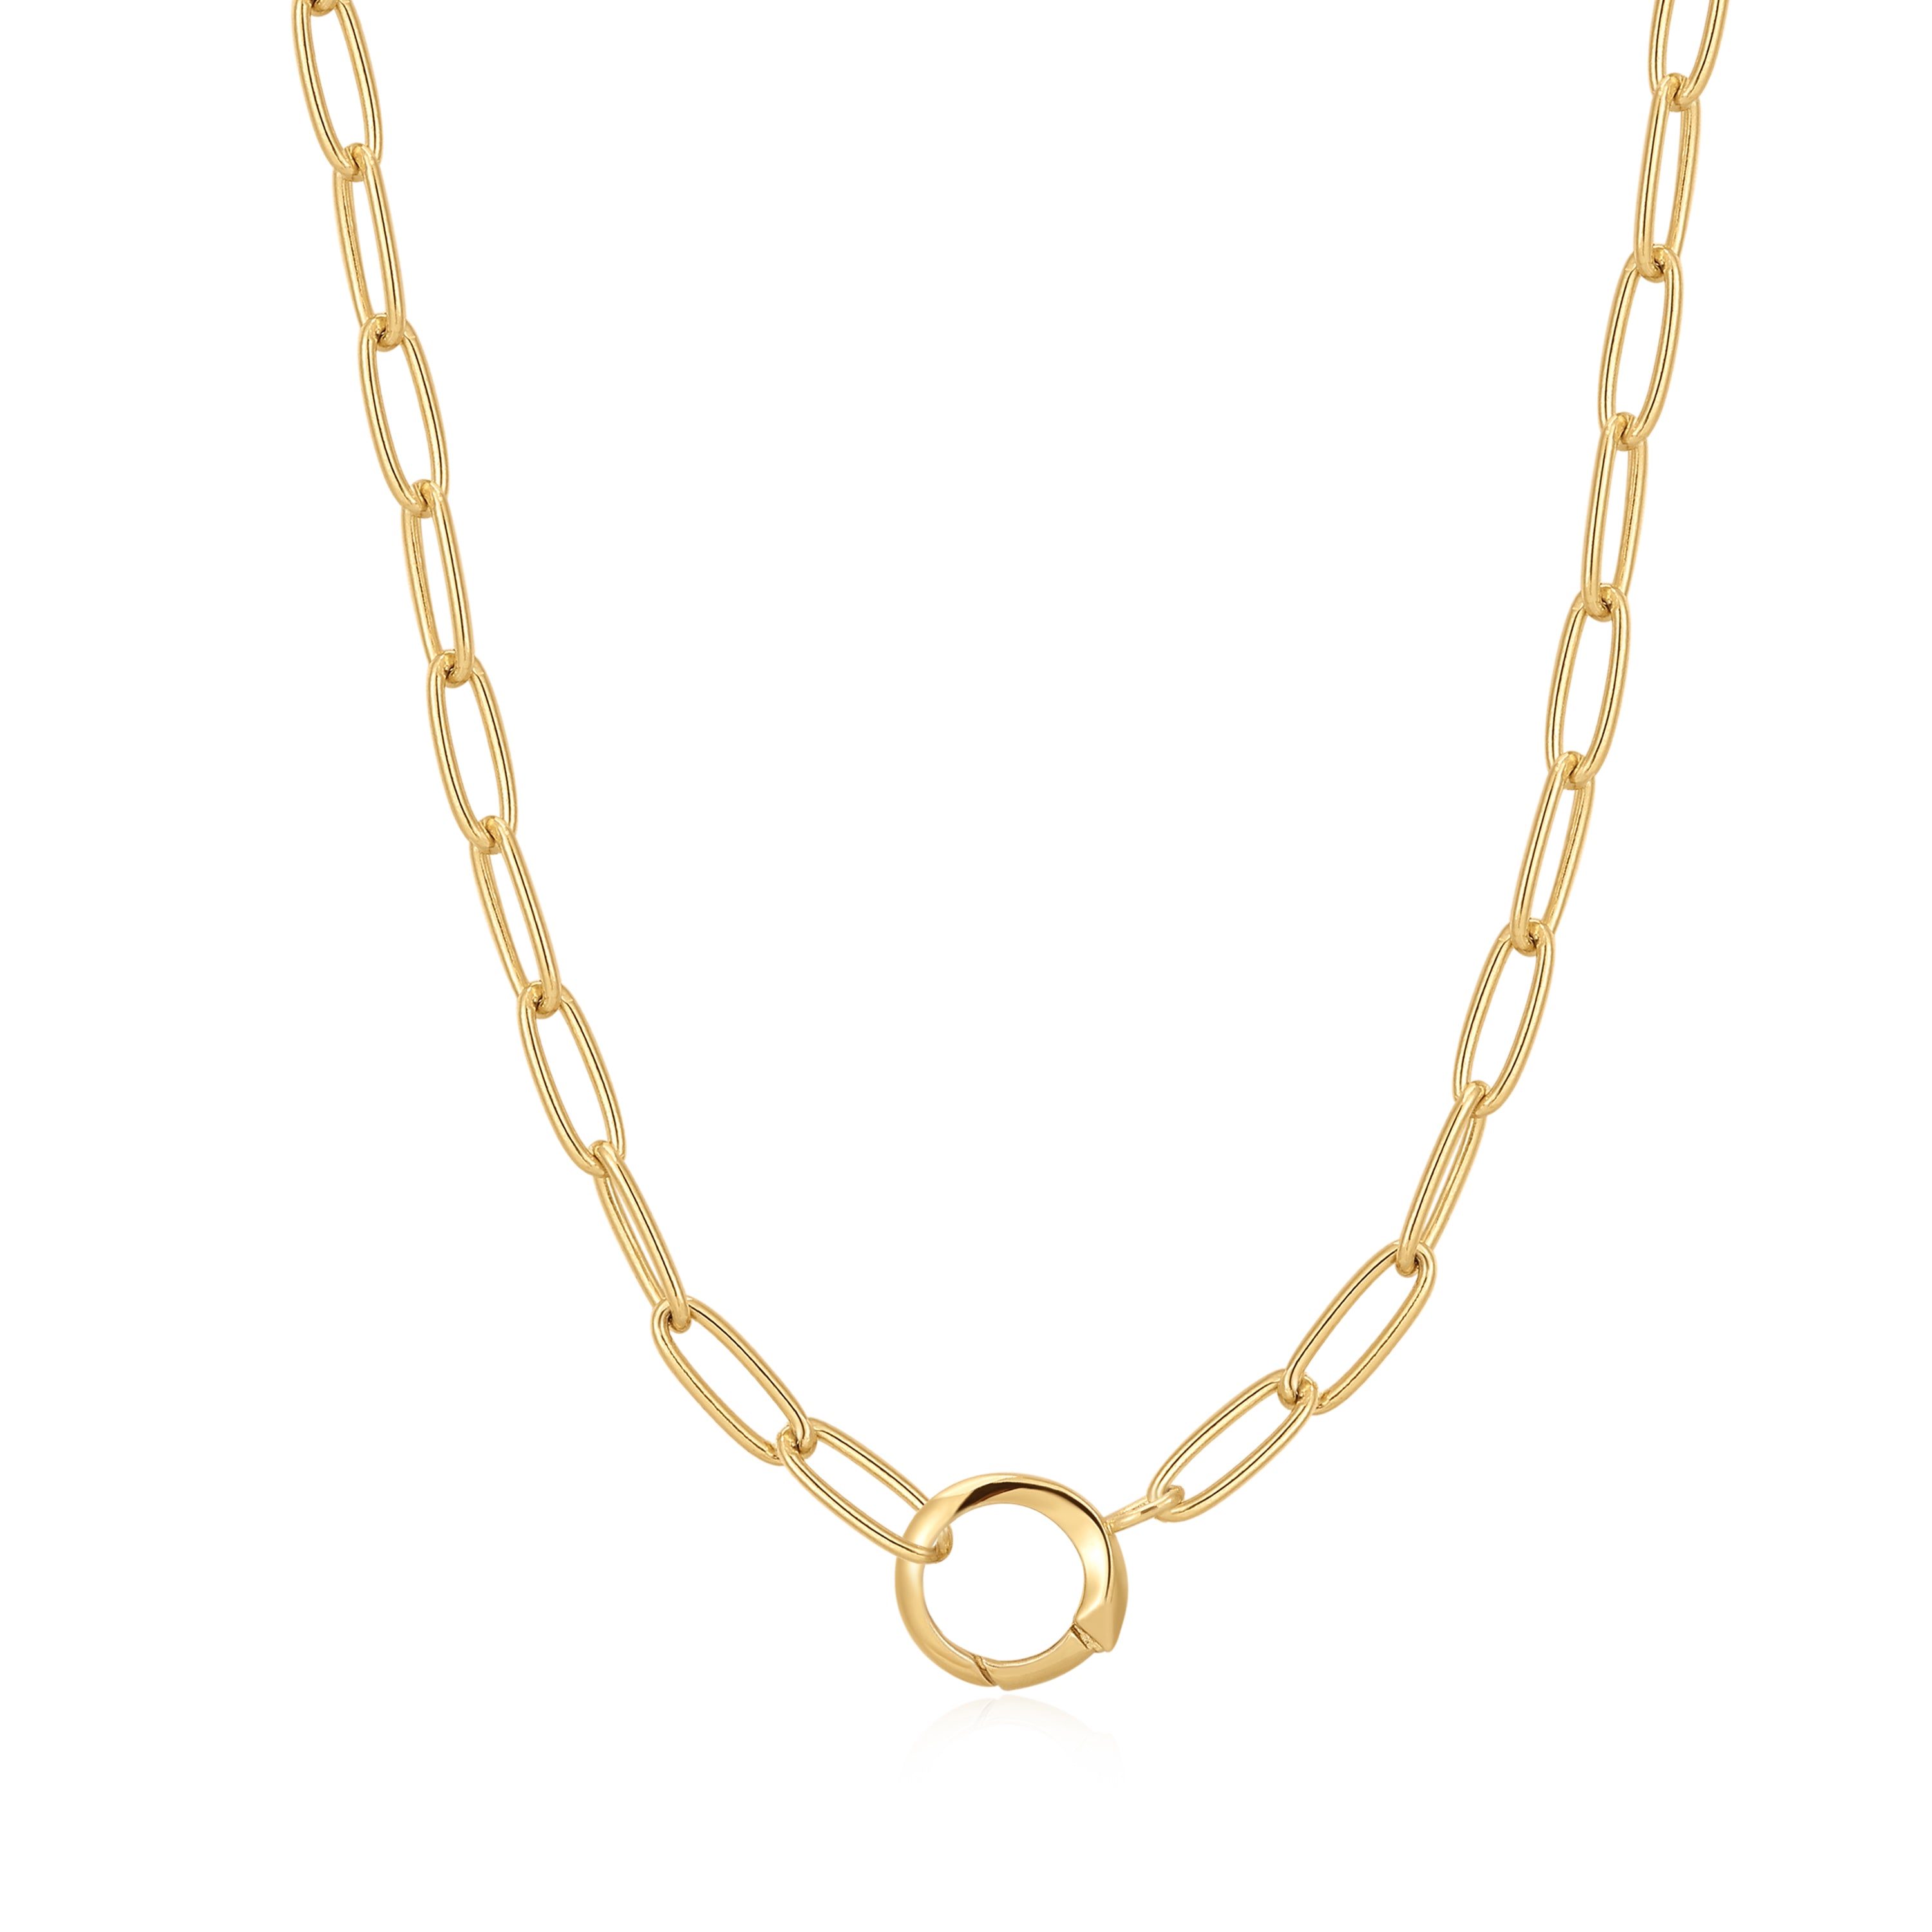 GOLD LINK CHARM NECKLACE